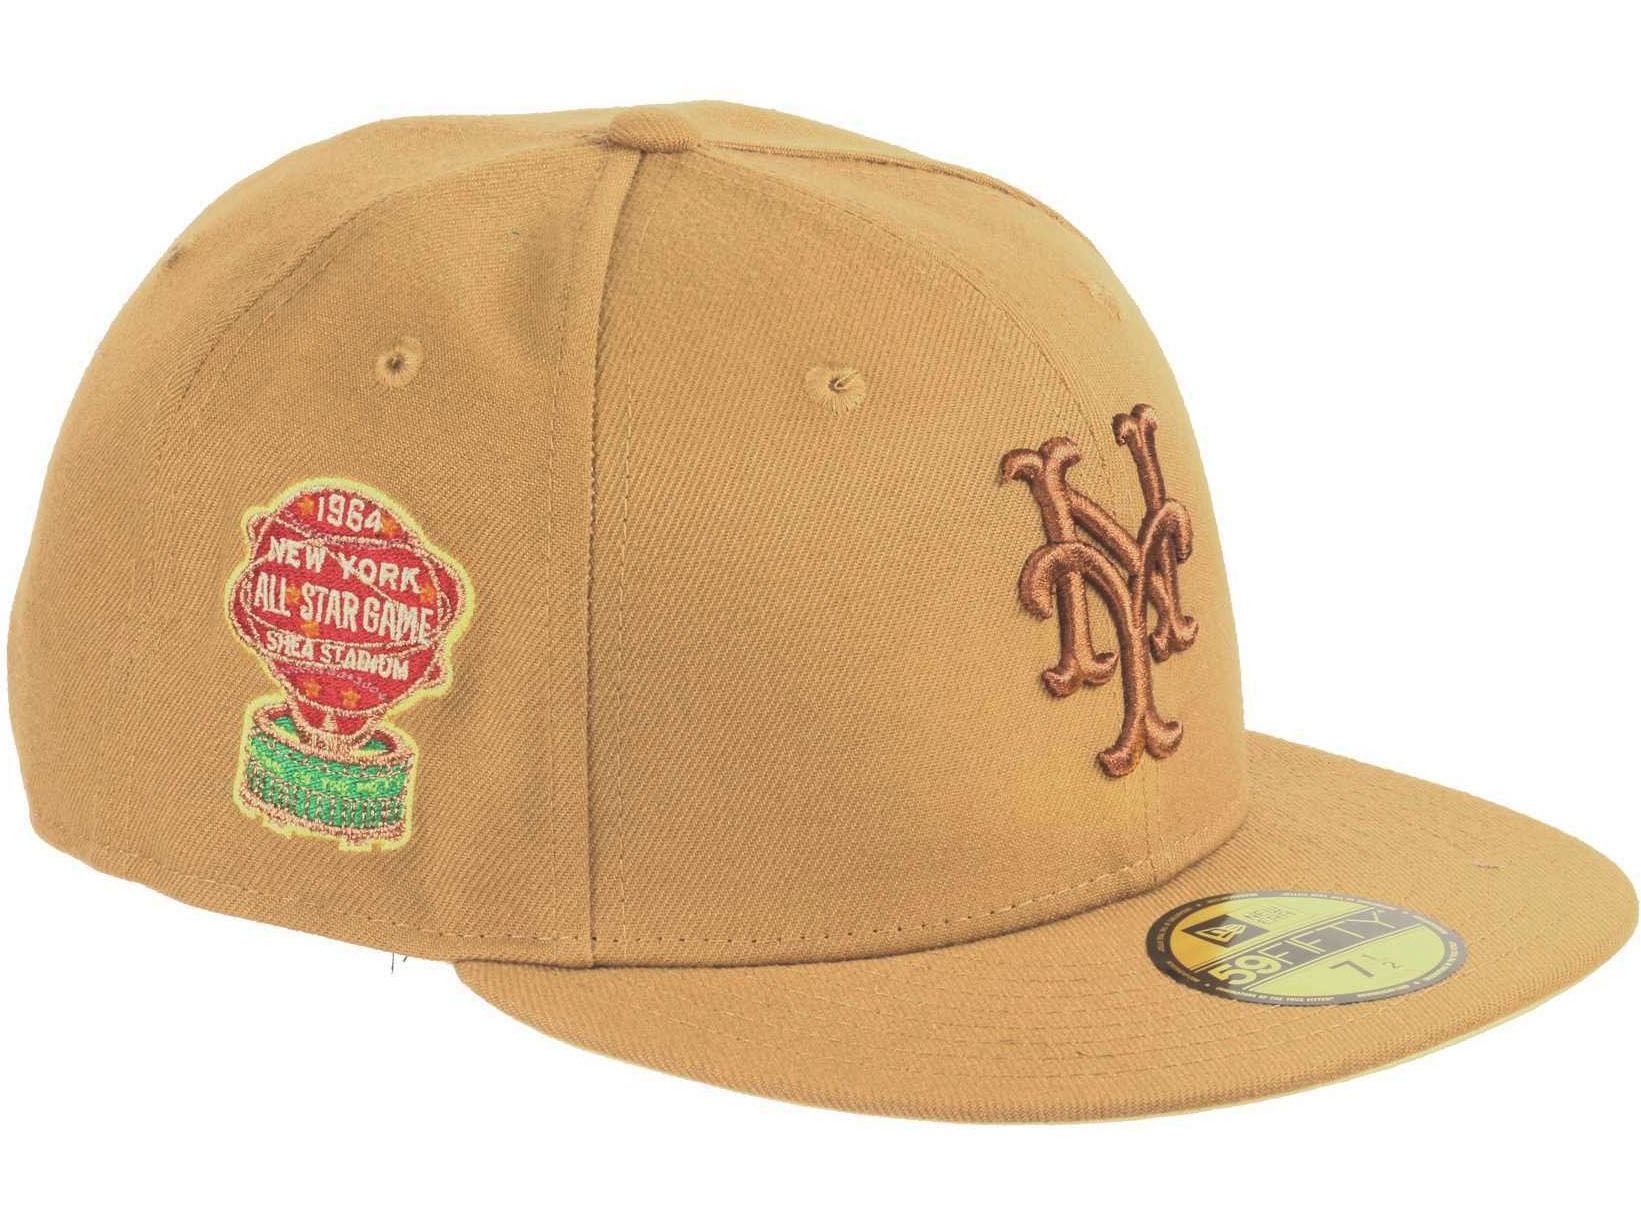 New York Mets All Star Game 1964 Brown 59Fifty Basecap New Era